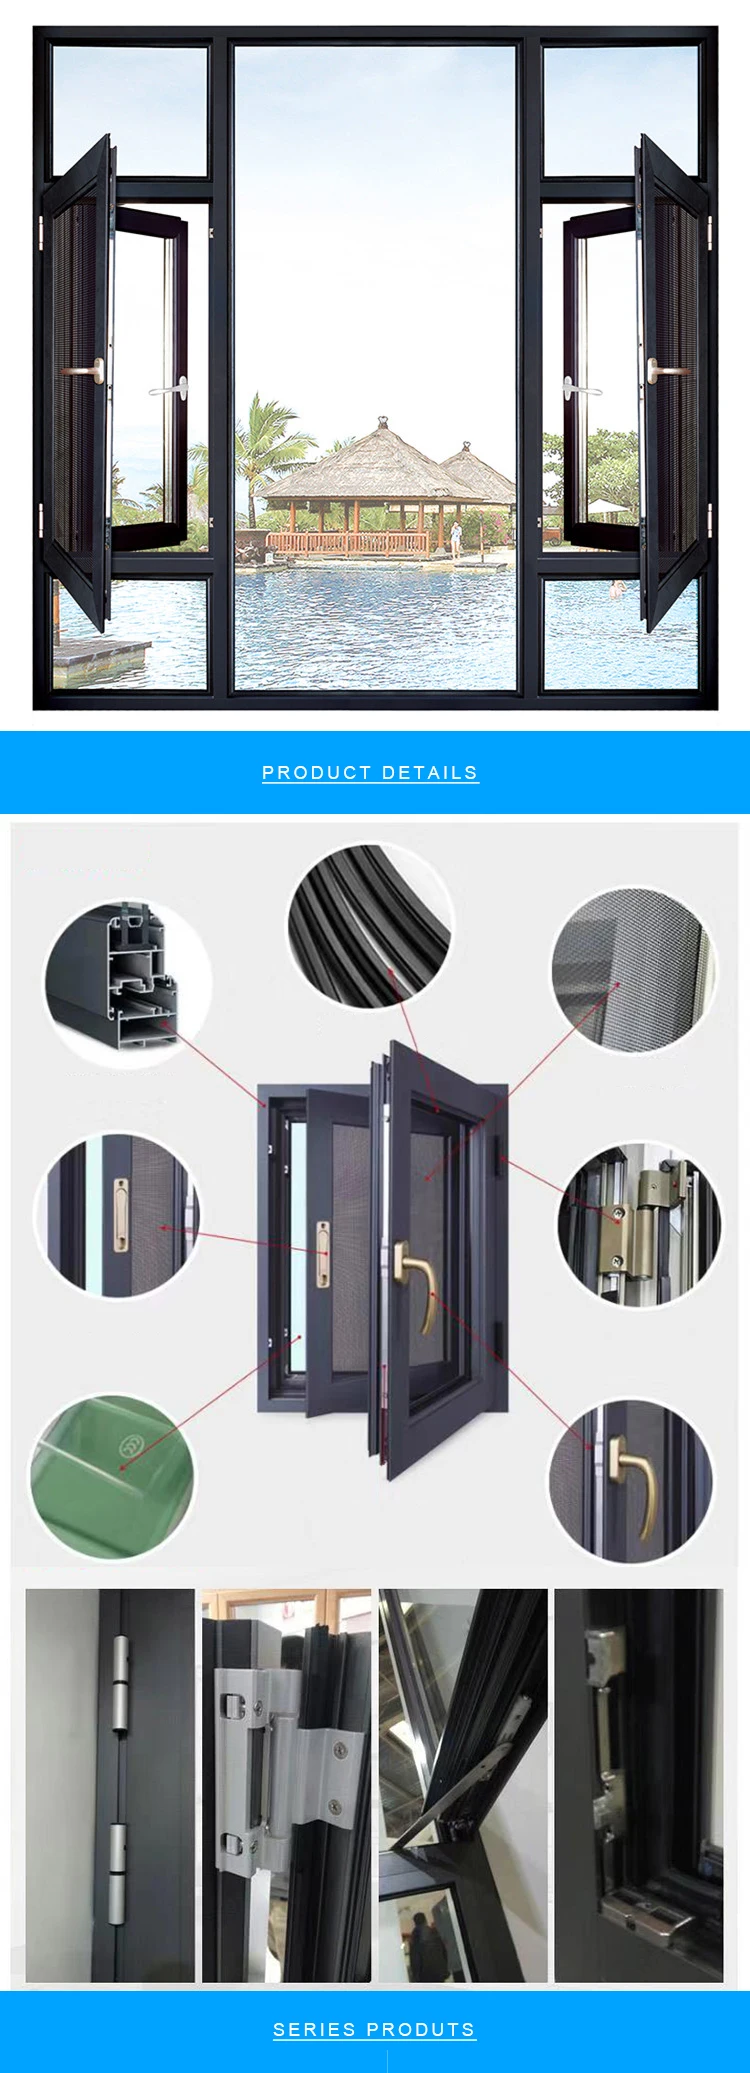 Frosted Film Thermal Break Windows Made In China Aluminum Casement Outward Opening Window